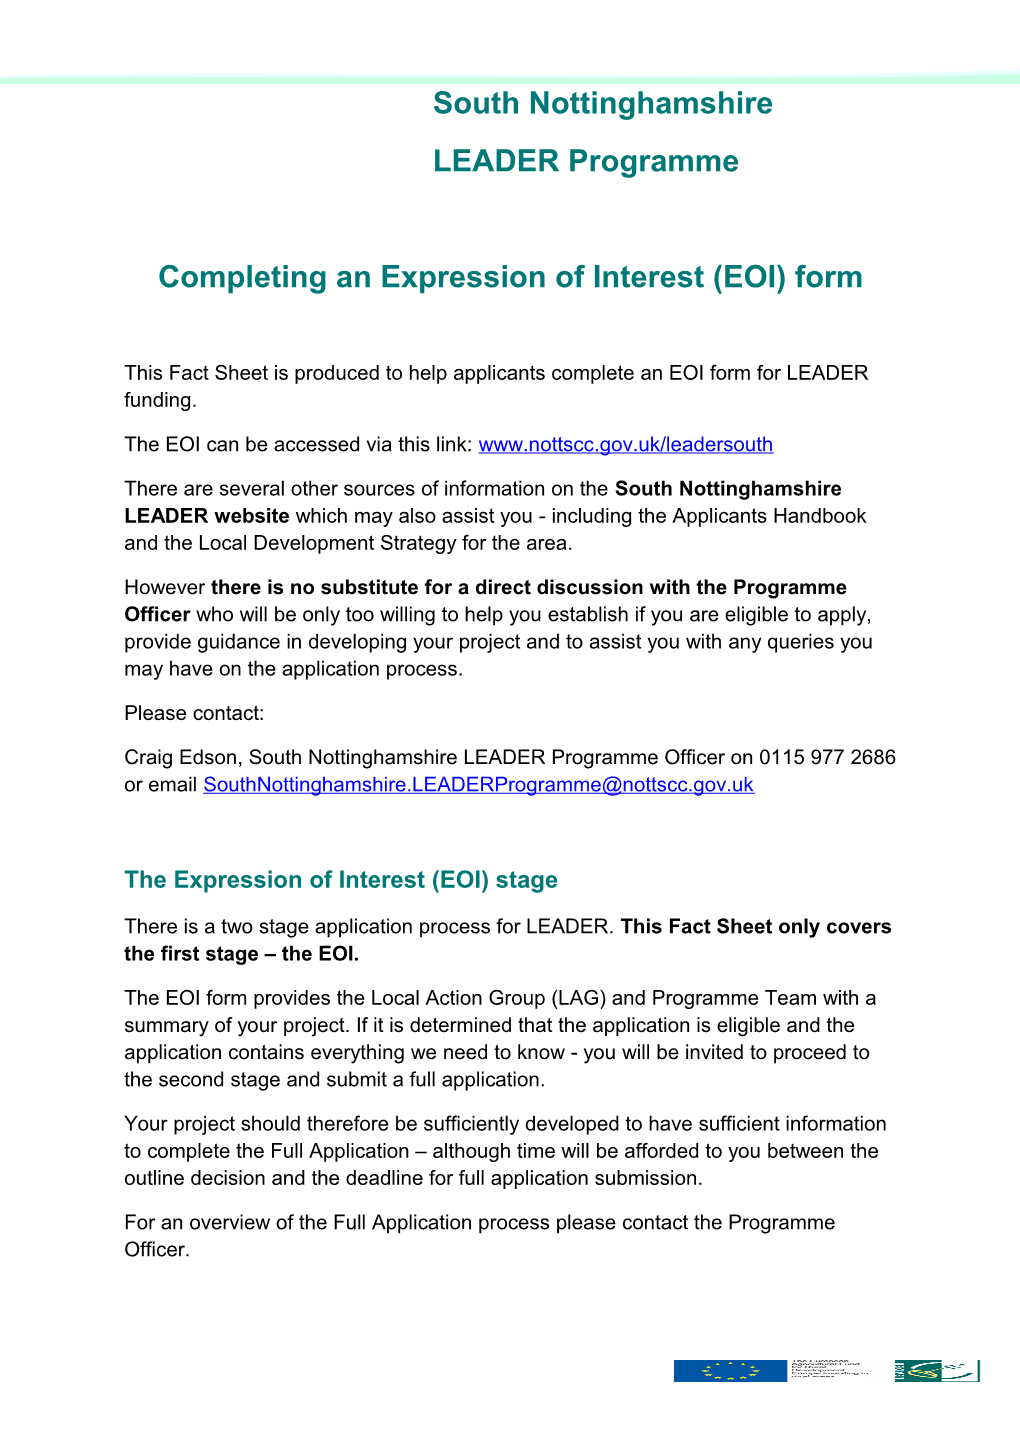 Completing an Expression of Interest (EOI) Form